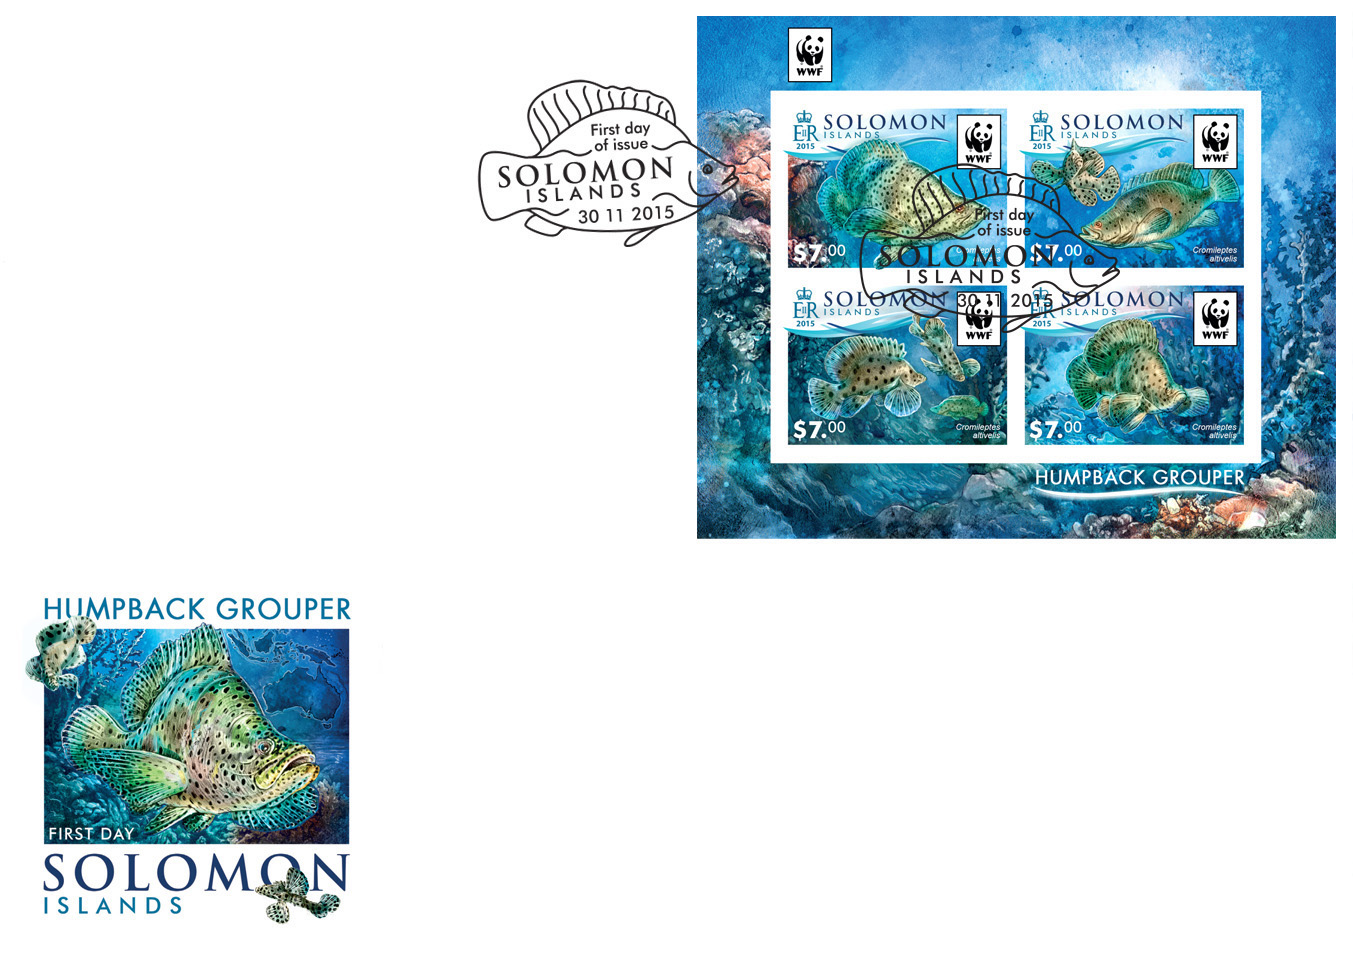 WWF – Fish (FDC imperf.) - Issue of Solomon islands postage stamps